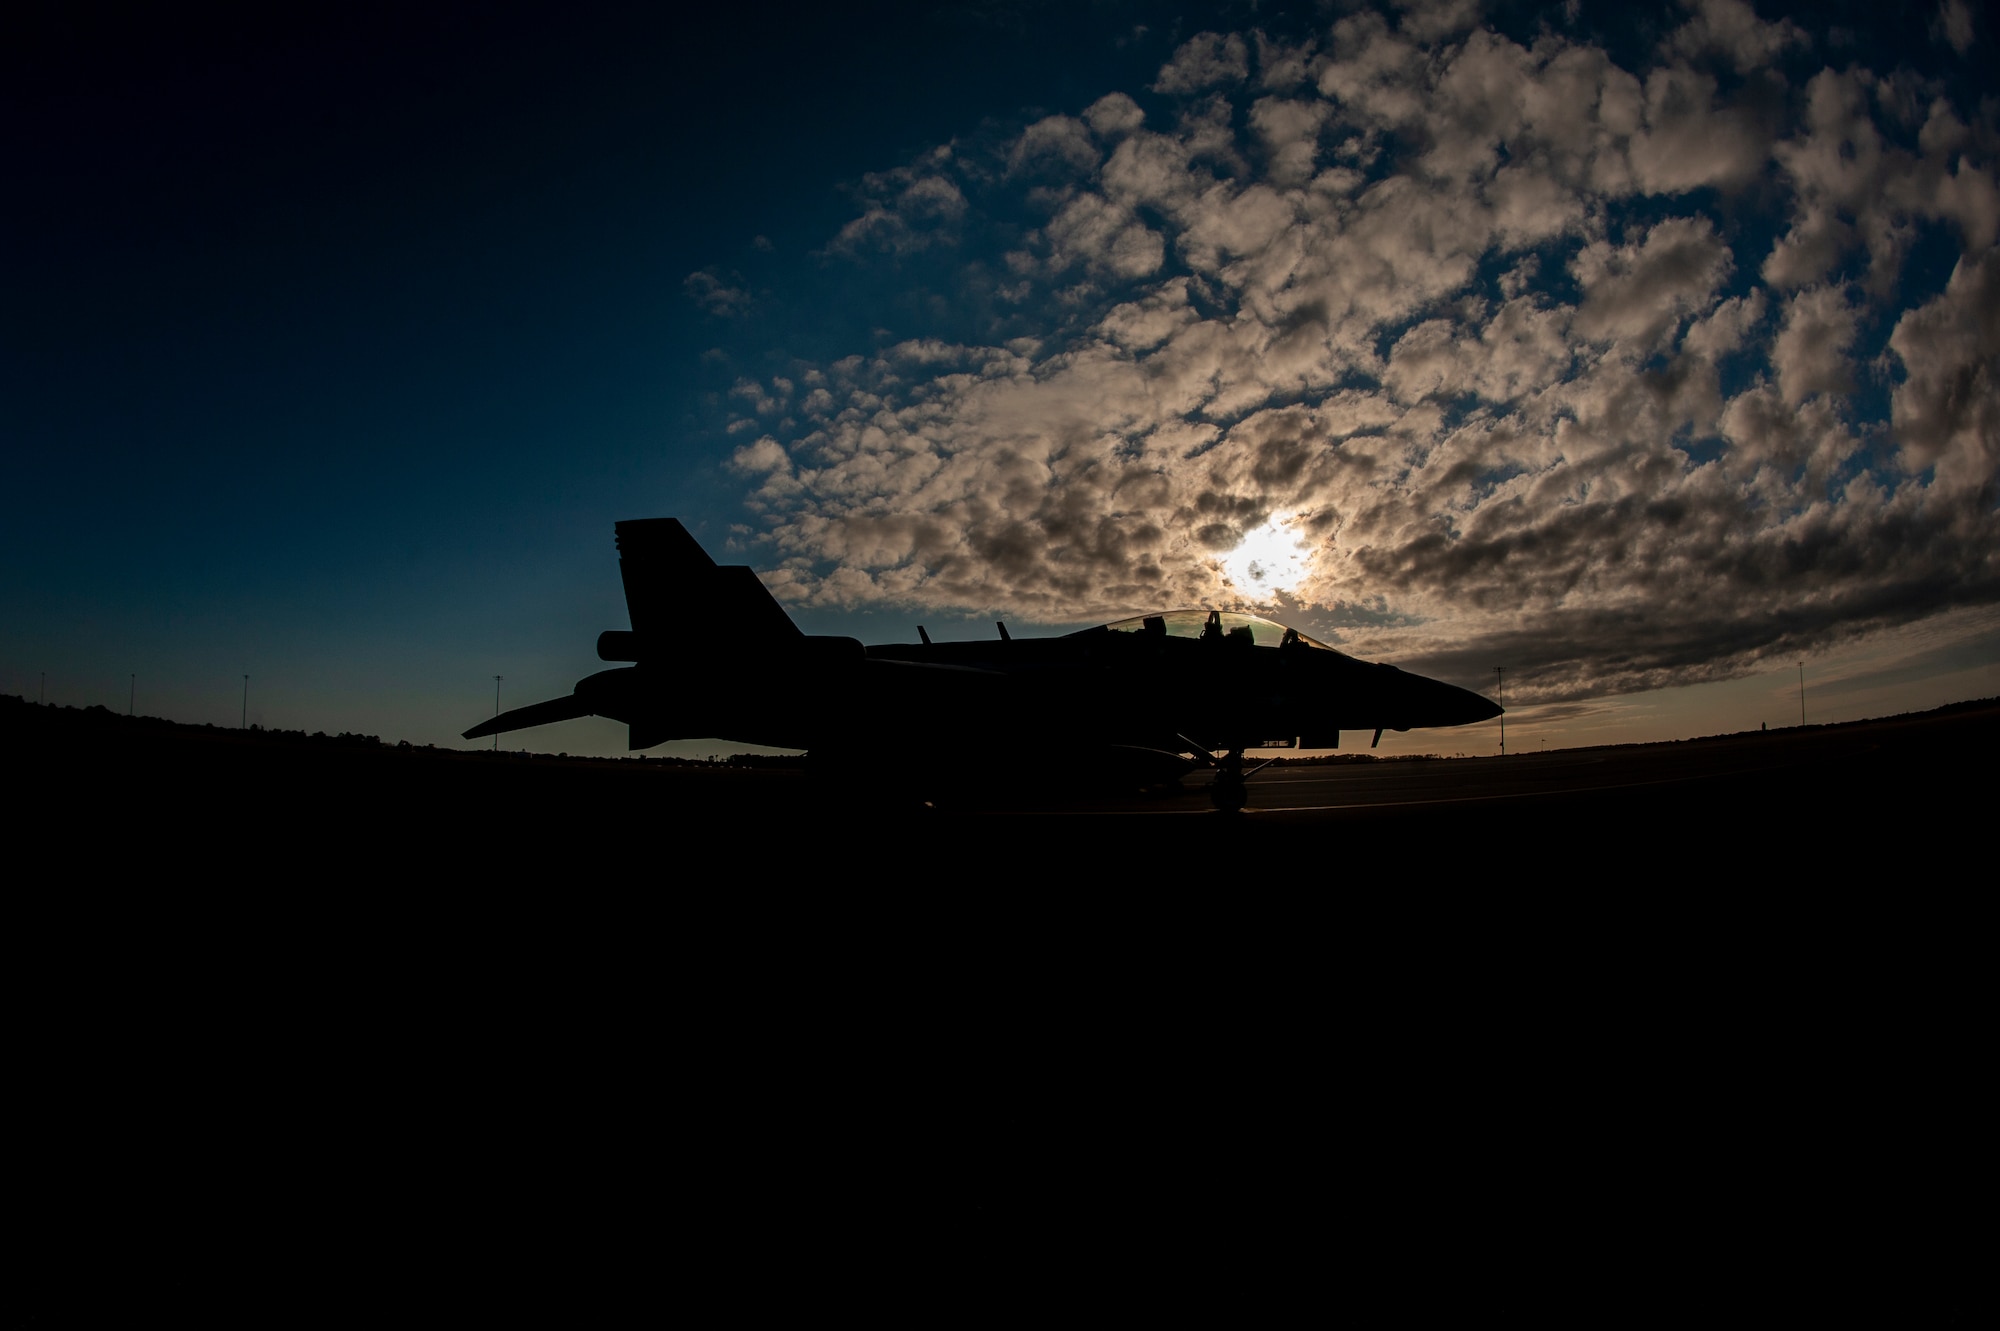 A Navy EA-18G Growler from the Electronic Attack Squadron 209, Naval Air Station Whidbey Island, Washington, is waiting to be refueled on the flight line at MacDill Air Force Base, Florida, on Jan. 22, 2021. Joint operations allow every branch to train together and operate at their greatest capacities with minimal limitations, ensuring mission success both locally and globally. (U.S. Air Force photo by Airman 1st Class David D. McLoney)